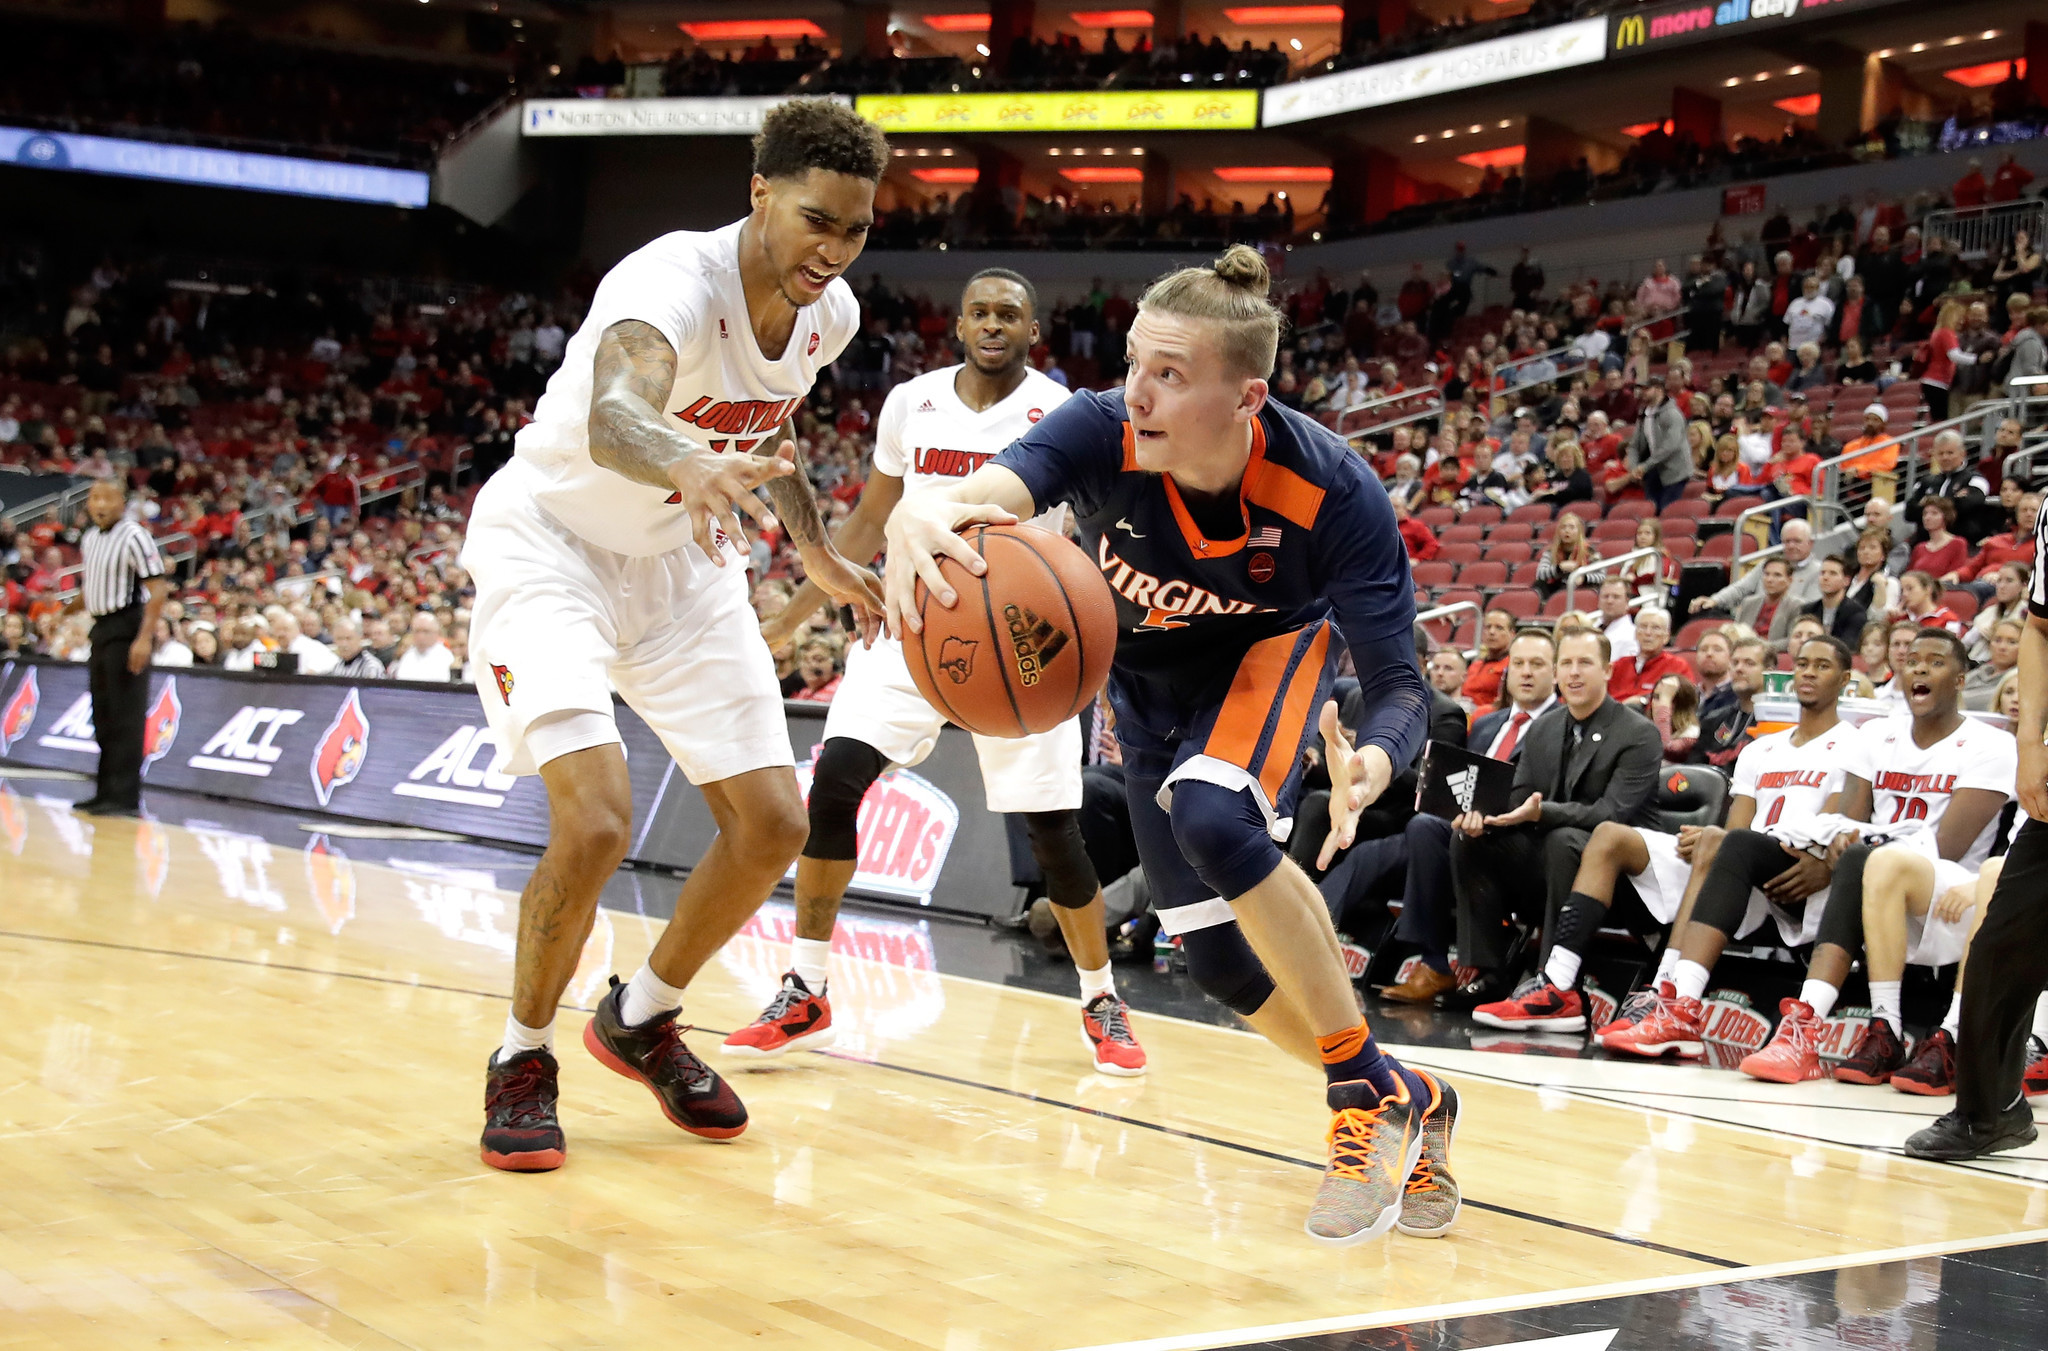 Buttoned-up Virginia basketball team learns to let down 